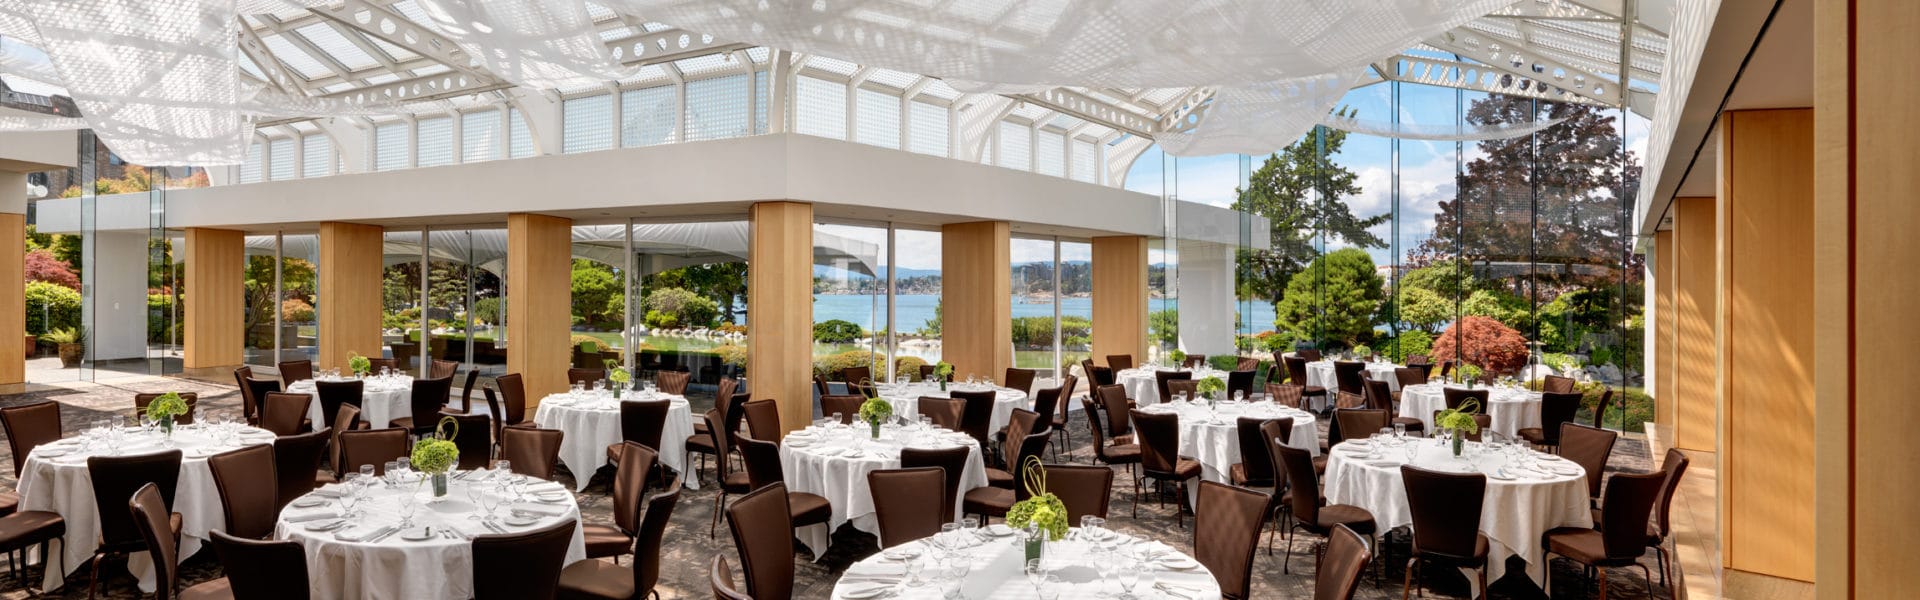 Terrace Blarrom set for dinner, views of the garden and Victoria's outer harbour